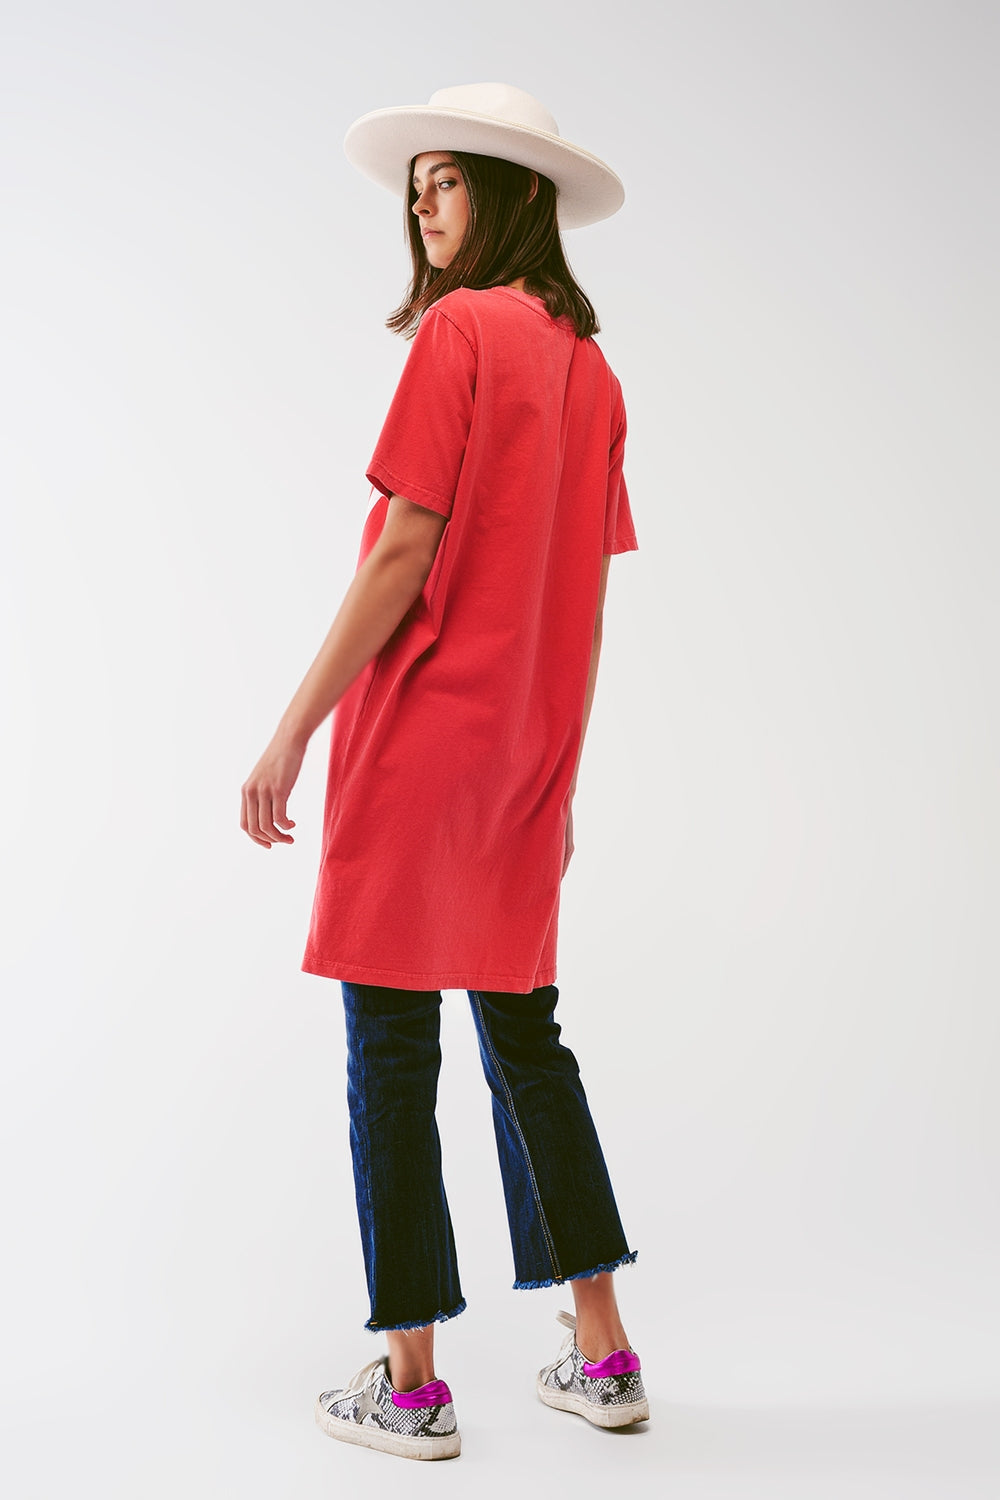 T-Shirt Dress With Make It Happen Text in Red